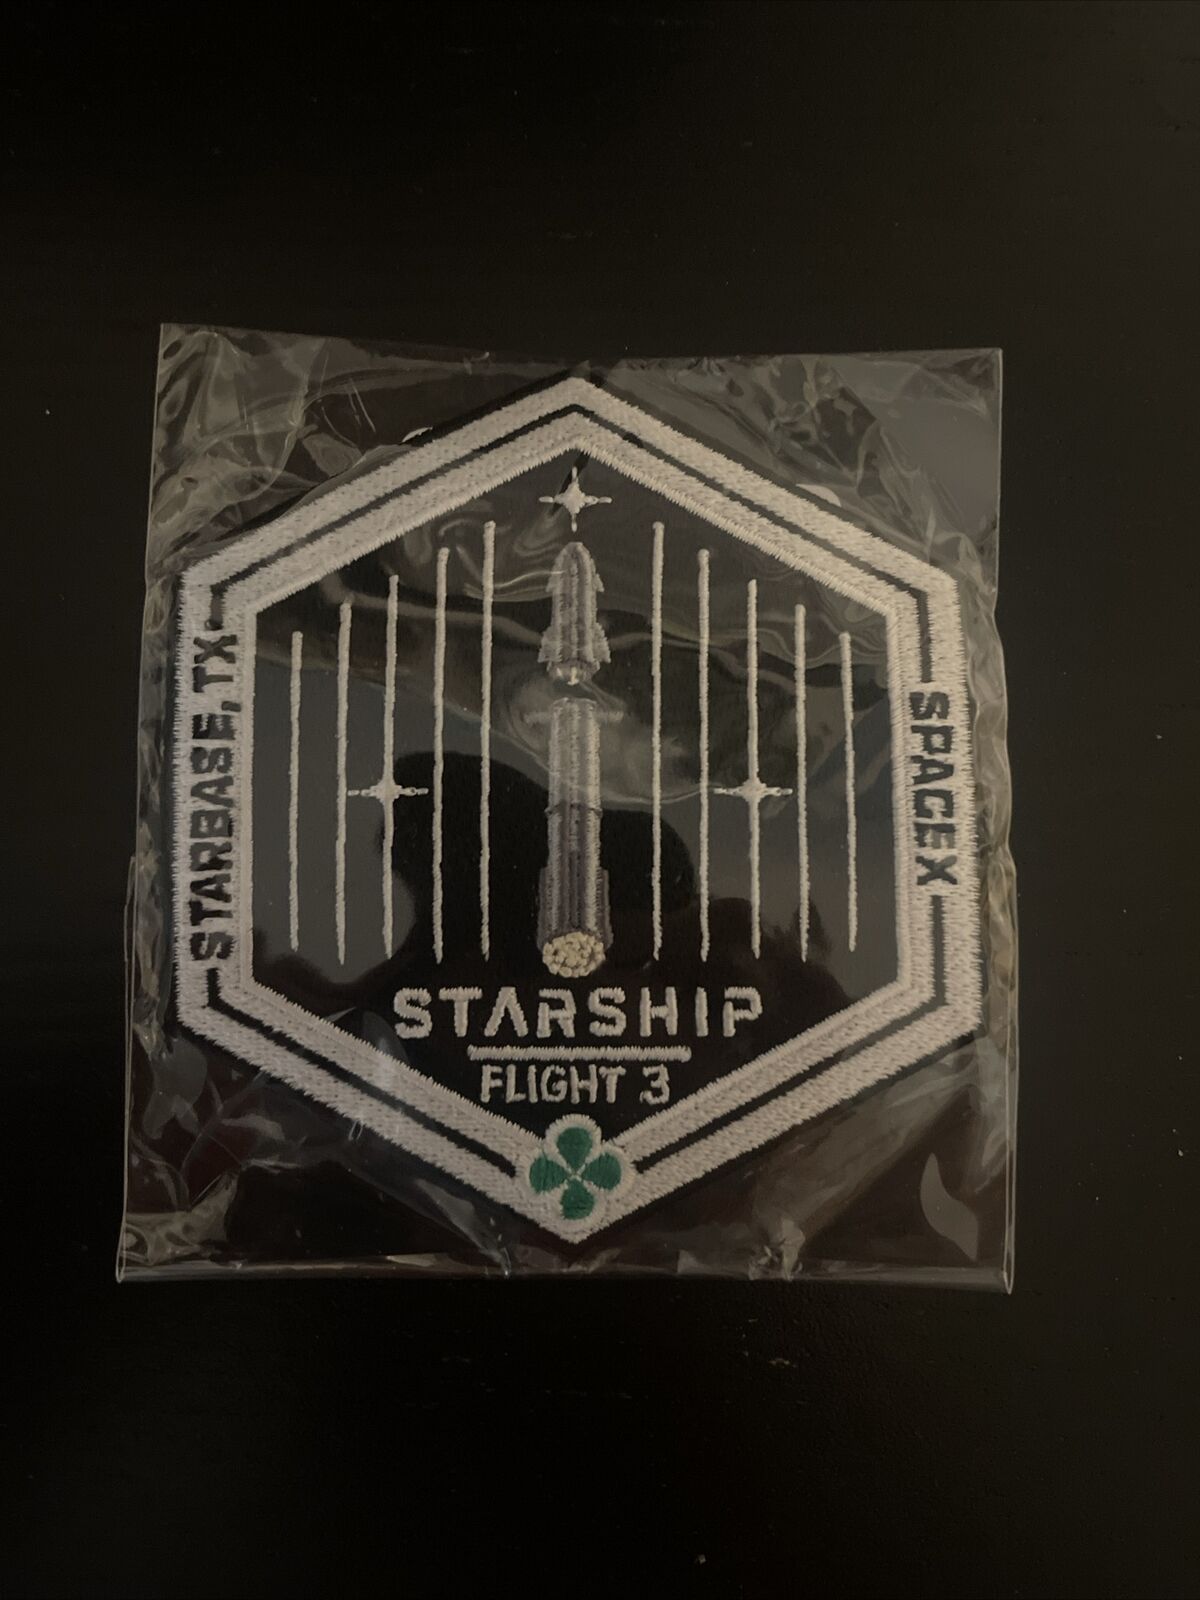 SOLD OUT Authentic SPACEX STARSHIP TEST FLIGHT 3 HEAVY STARBASE Mission PATCH